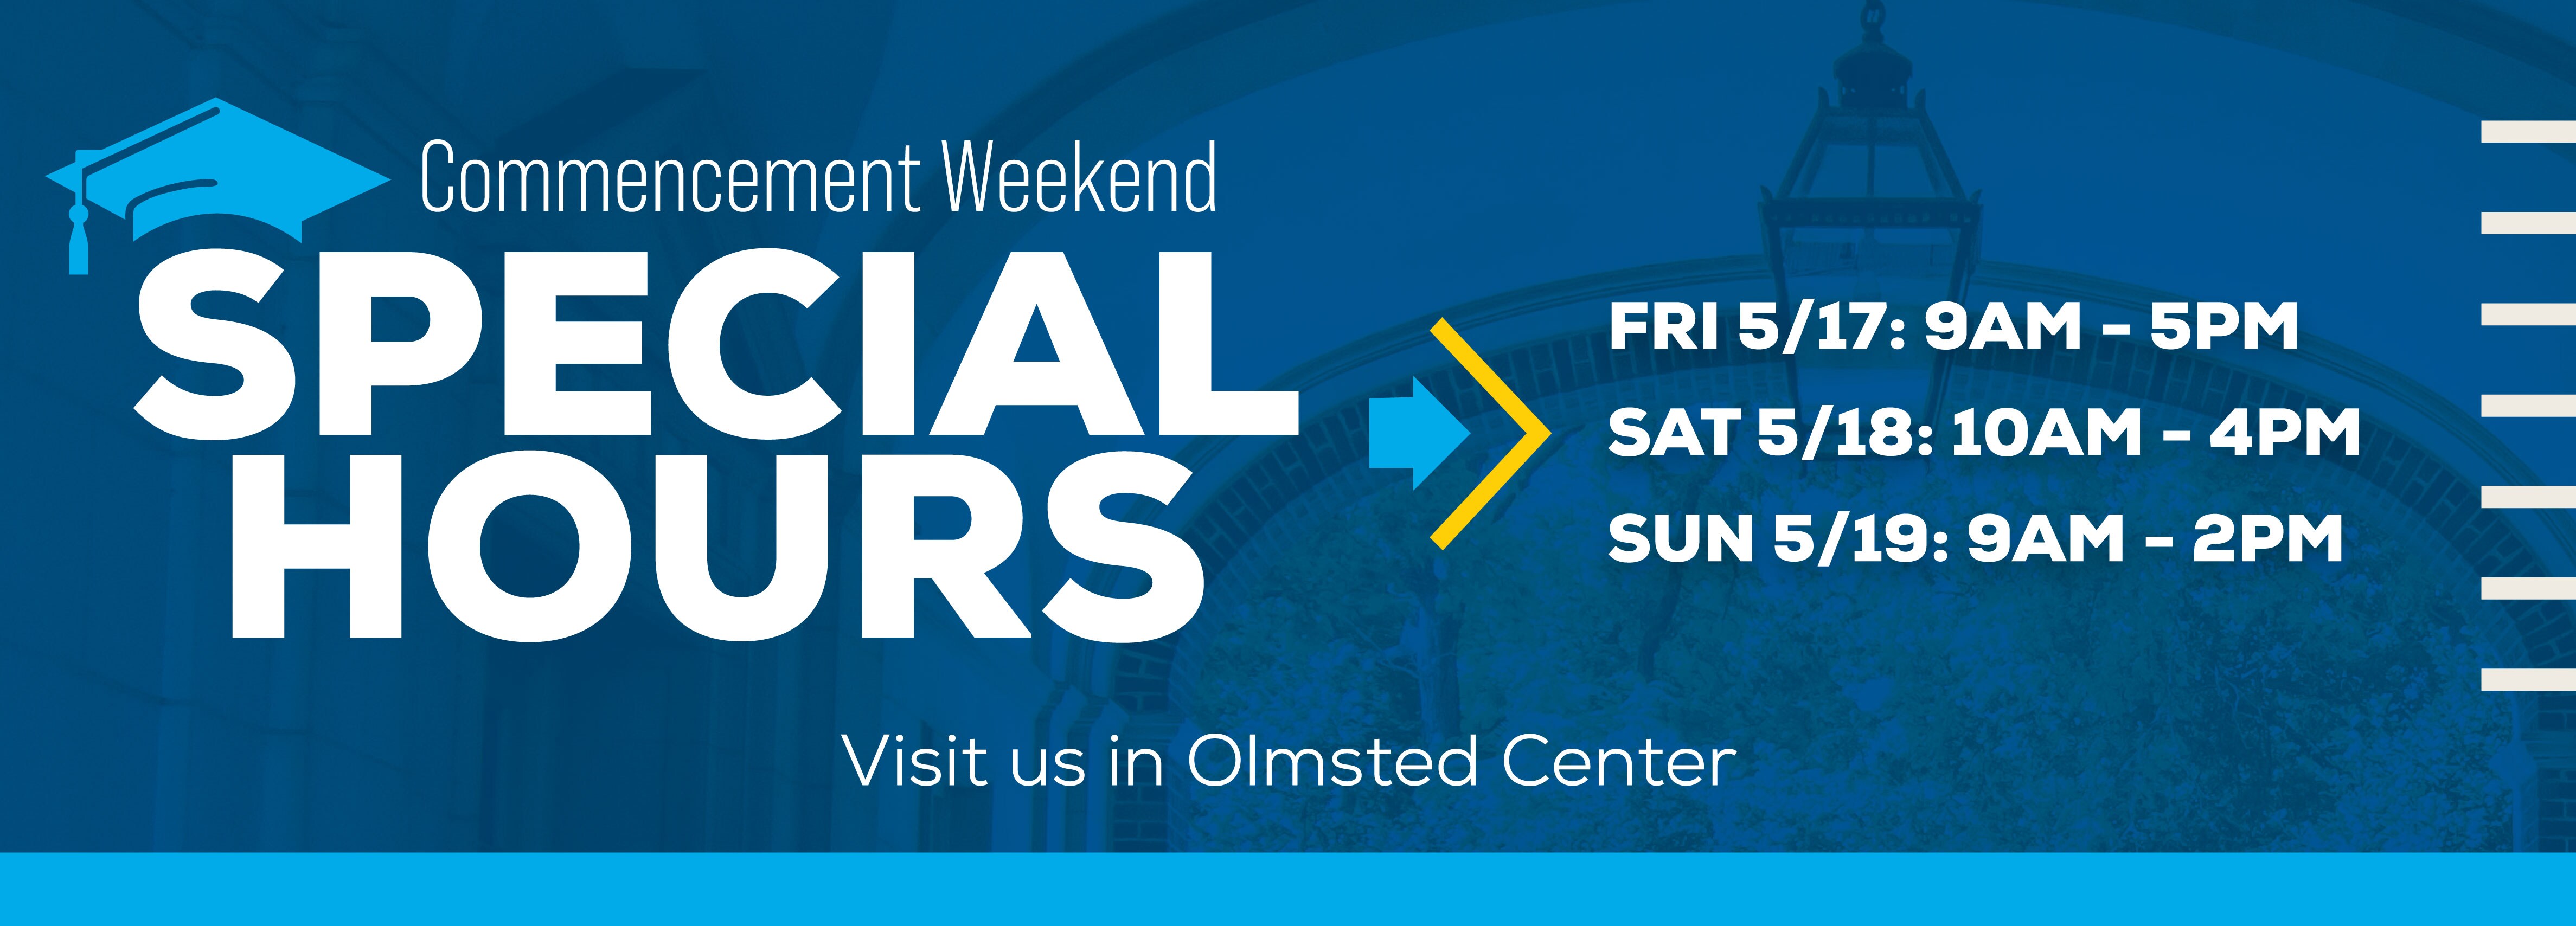 Commencement Weekend Special Hours FRI 5/17: 9AM - 5PM SAT 5/18: 10AM - 4PM  SUN 5/19: 9AM - 2PM Visit us in Olmsted Center